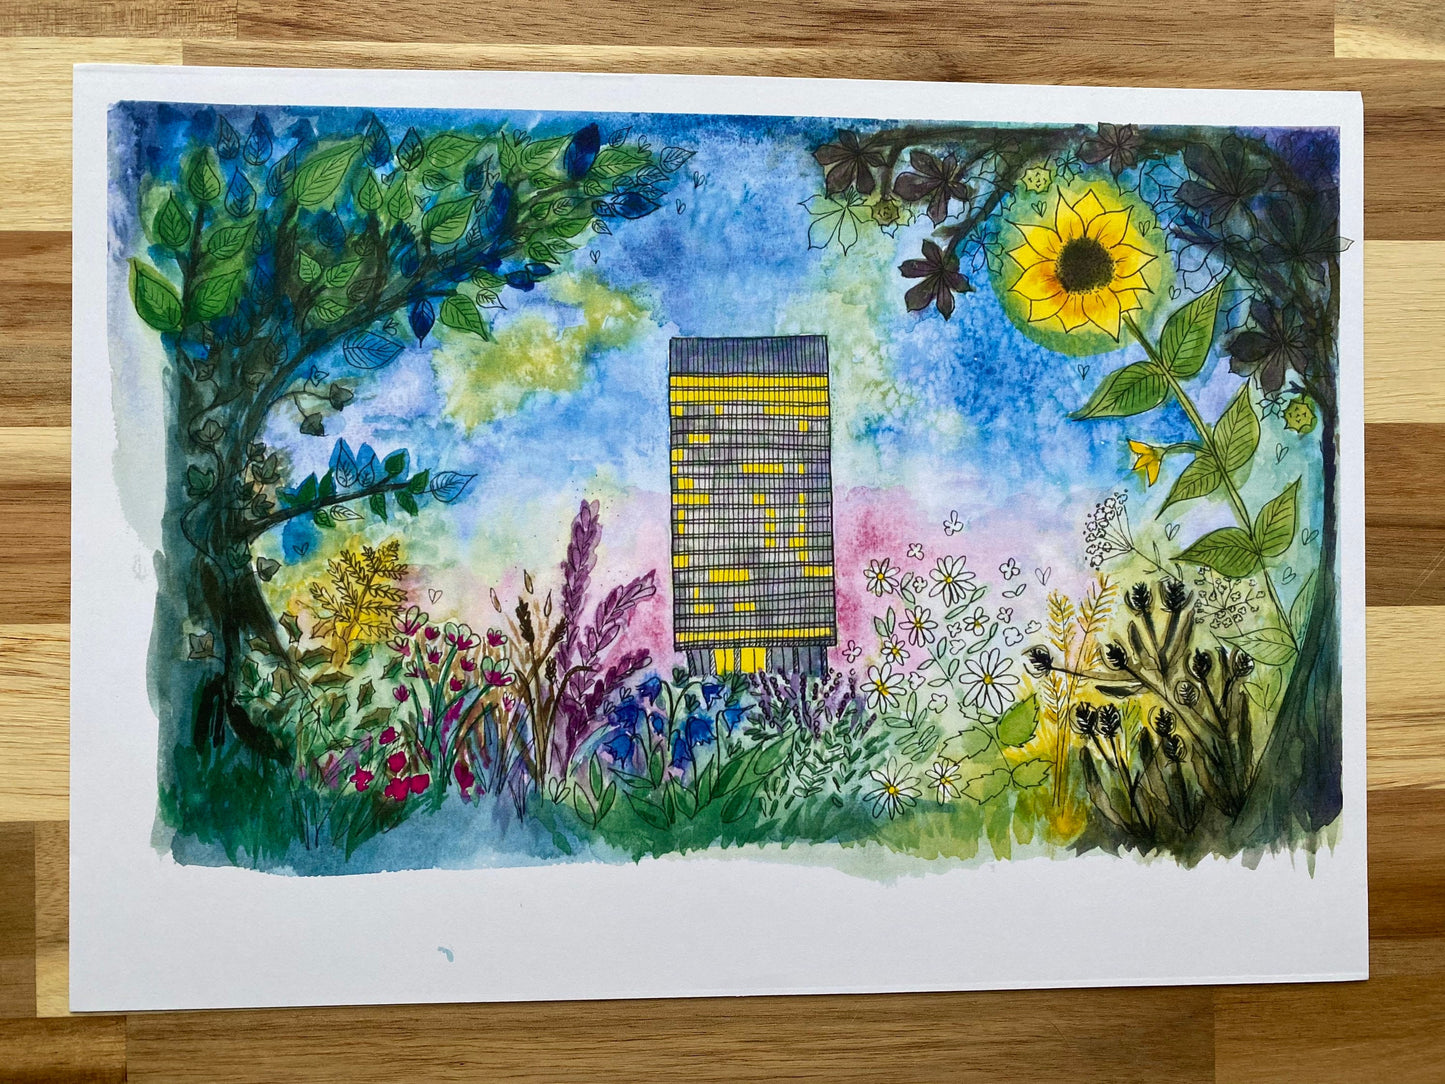 The Arts Tower Print